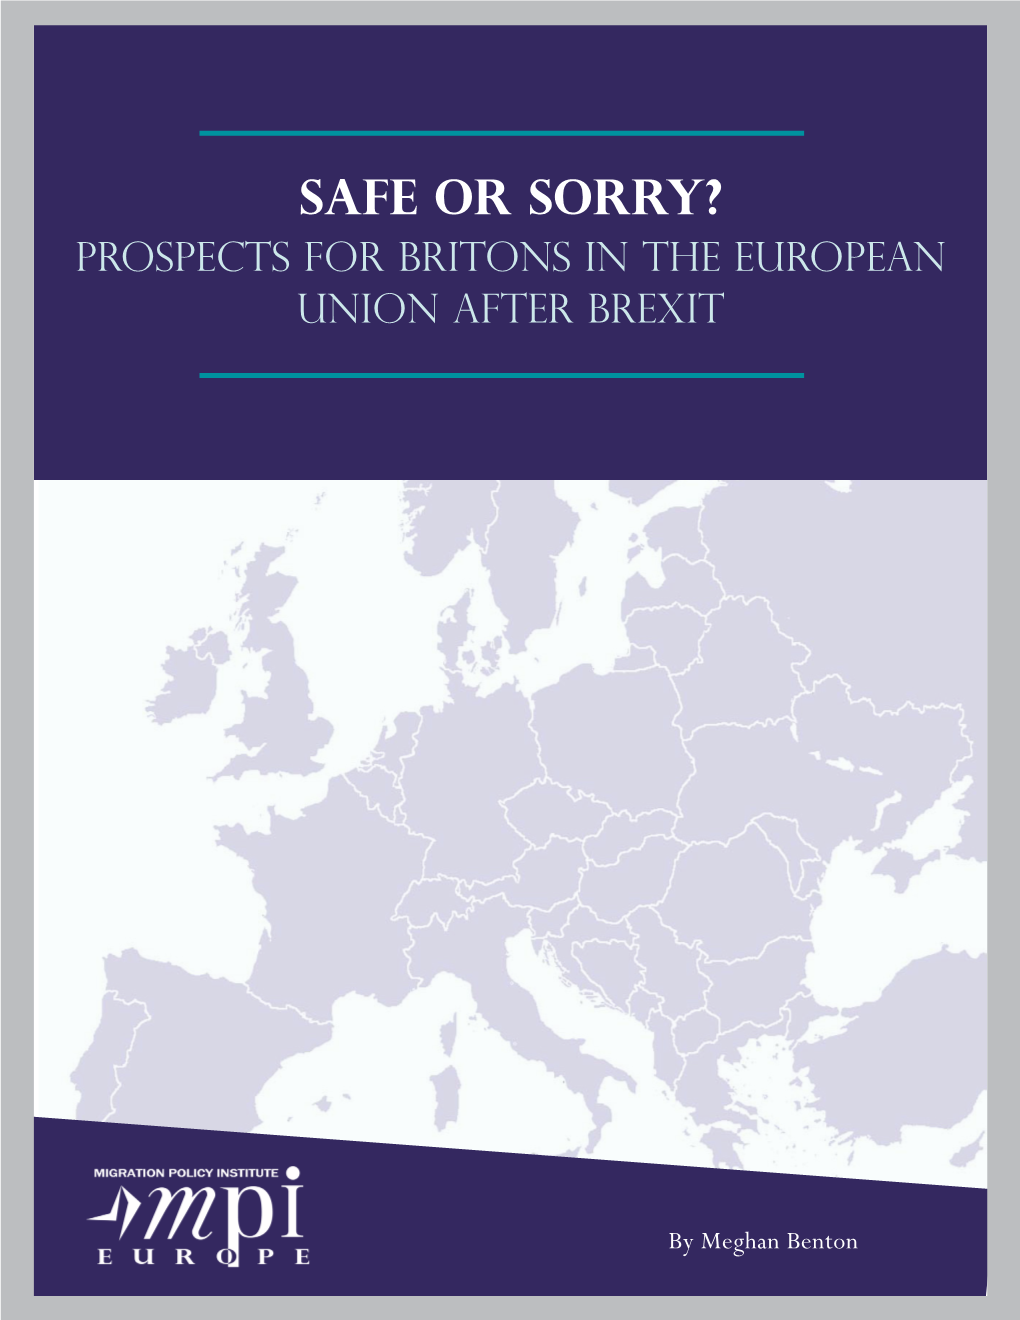 Safe Or Sorry? Prospects for Britons in the European Union After Brexit